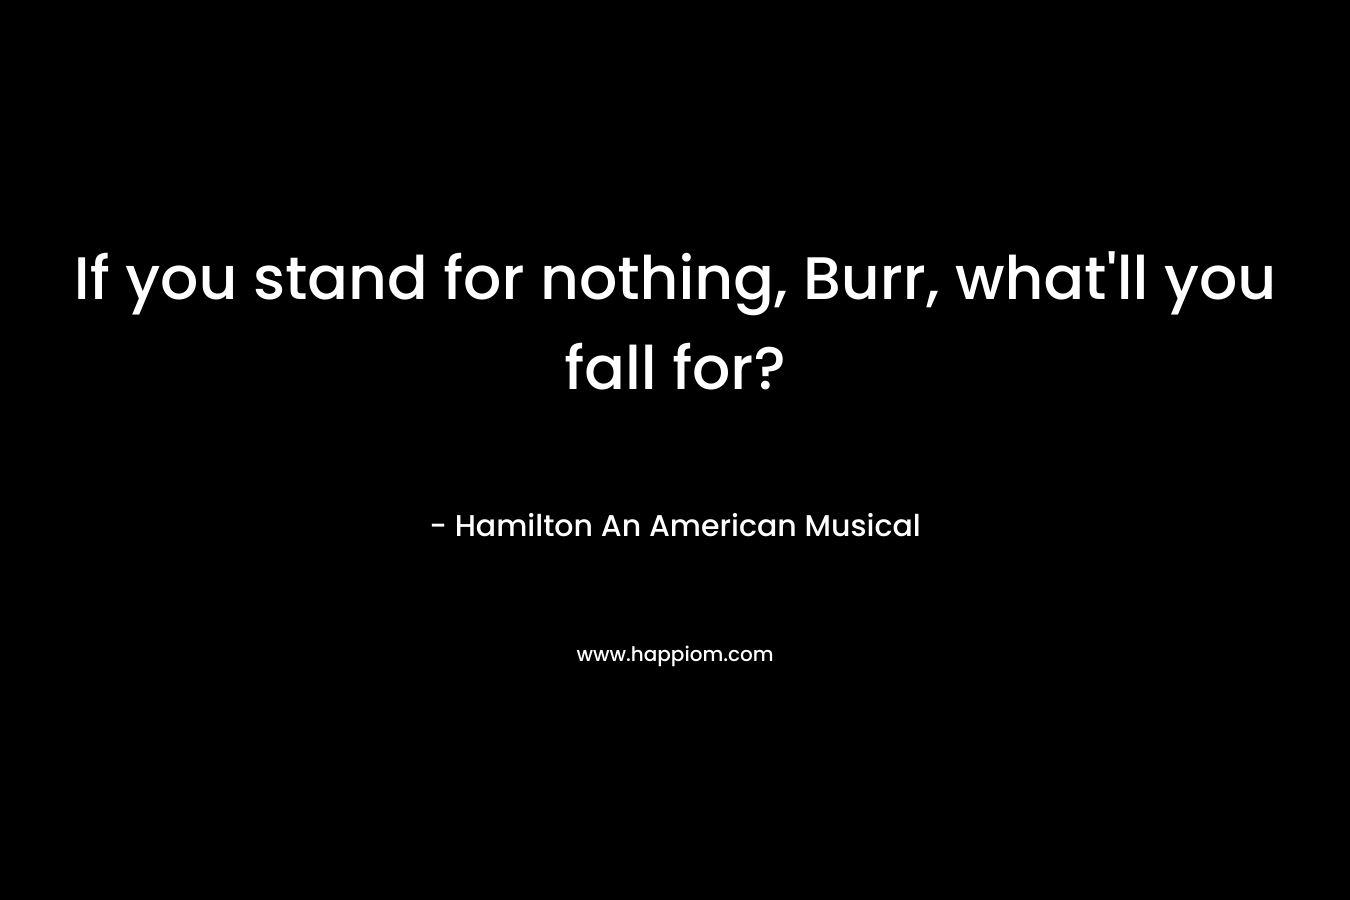 If you stand for nothing, Burr, what'll you fall for?